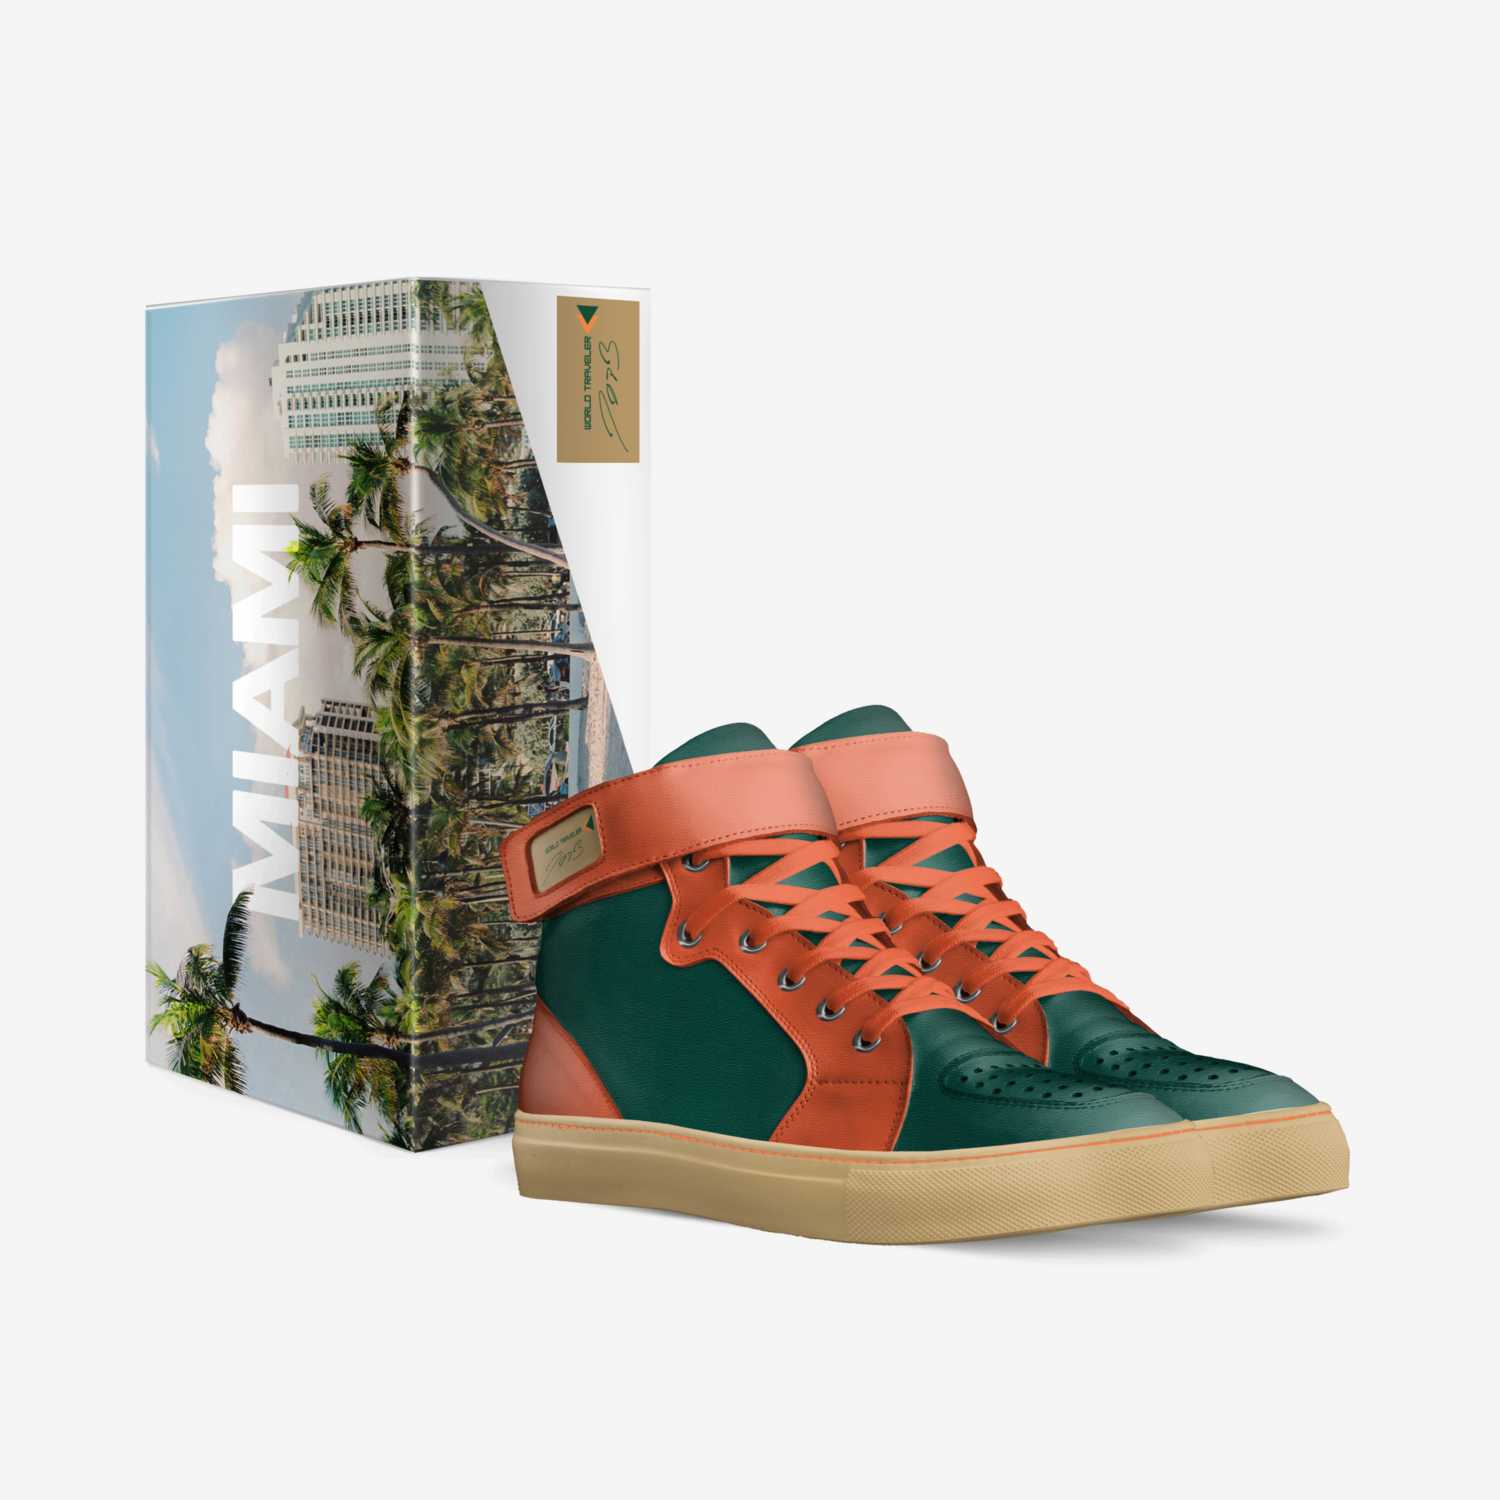 Earth Walker 1’s custom made in Italy shoes by Lorenzo Bell | Box view